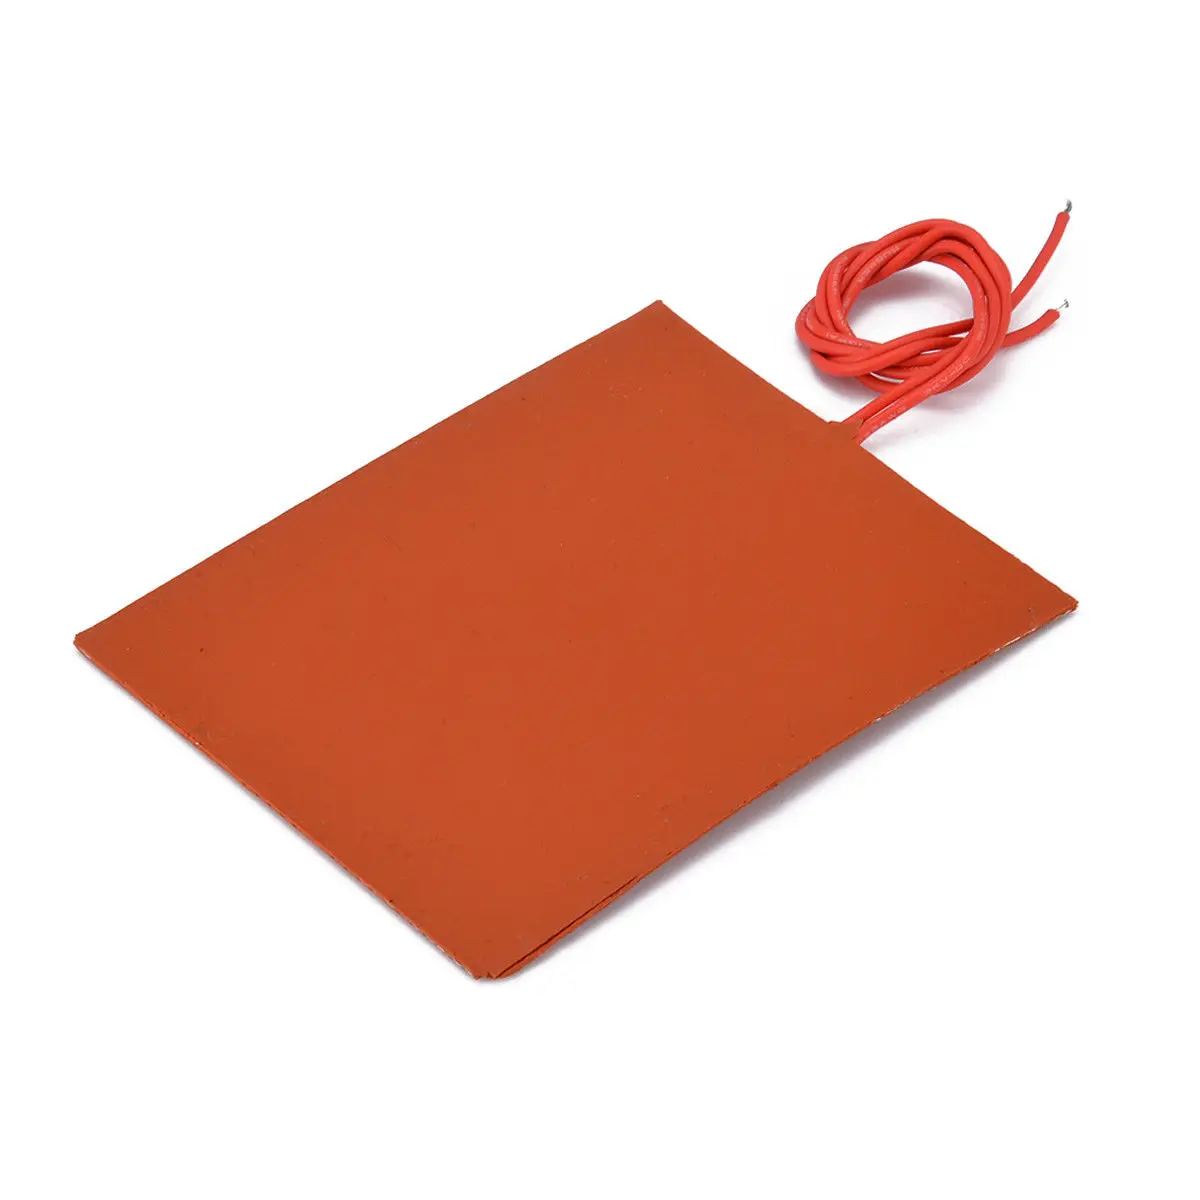 

Silicone Rubber Heater Mat For 3D Printer Heating Pad Flexible Waterproof Heated Universal 80x100mm High Quality